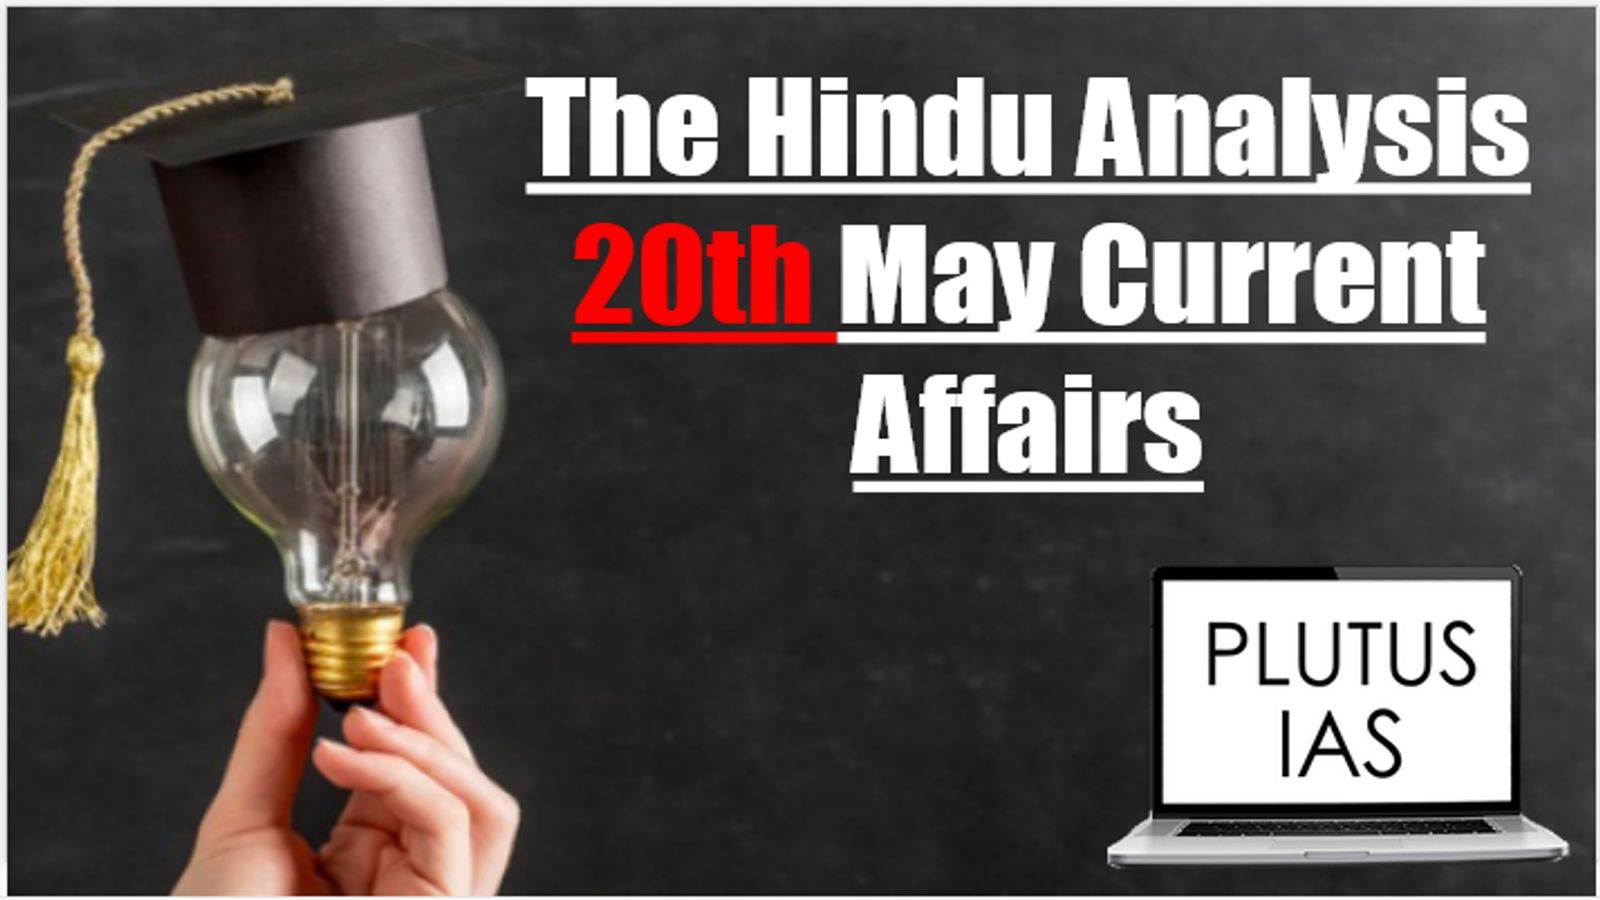 Today Current Affairs 20th May